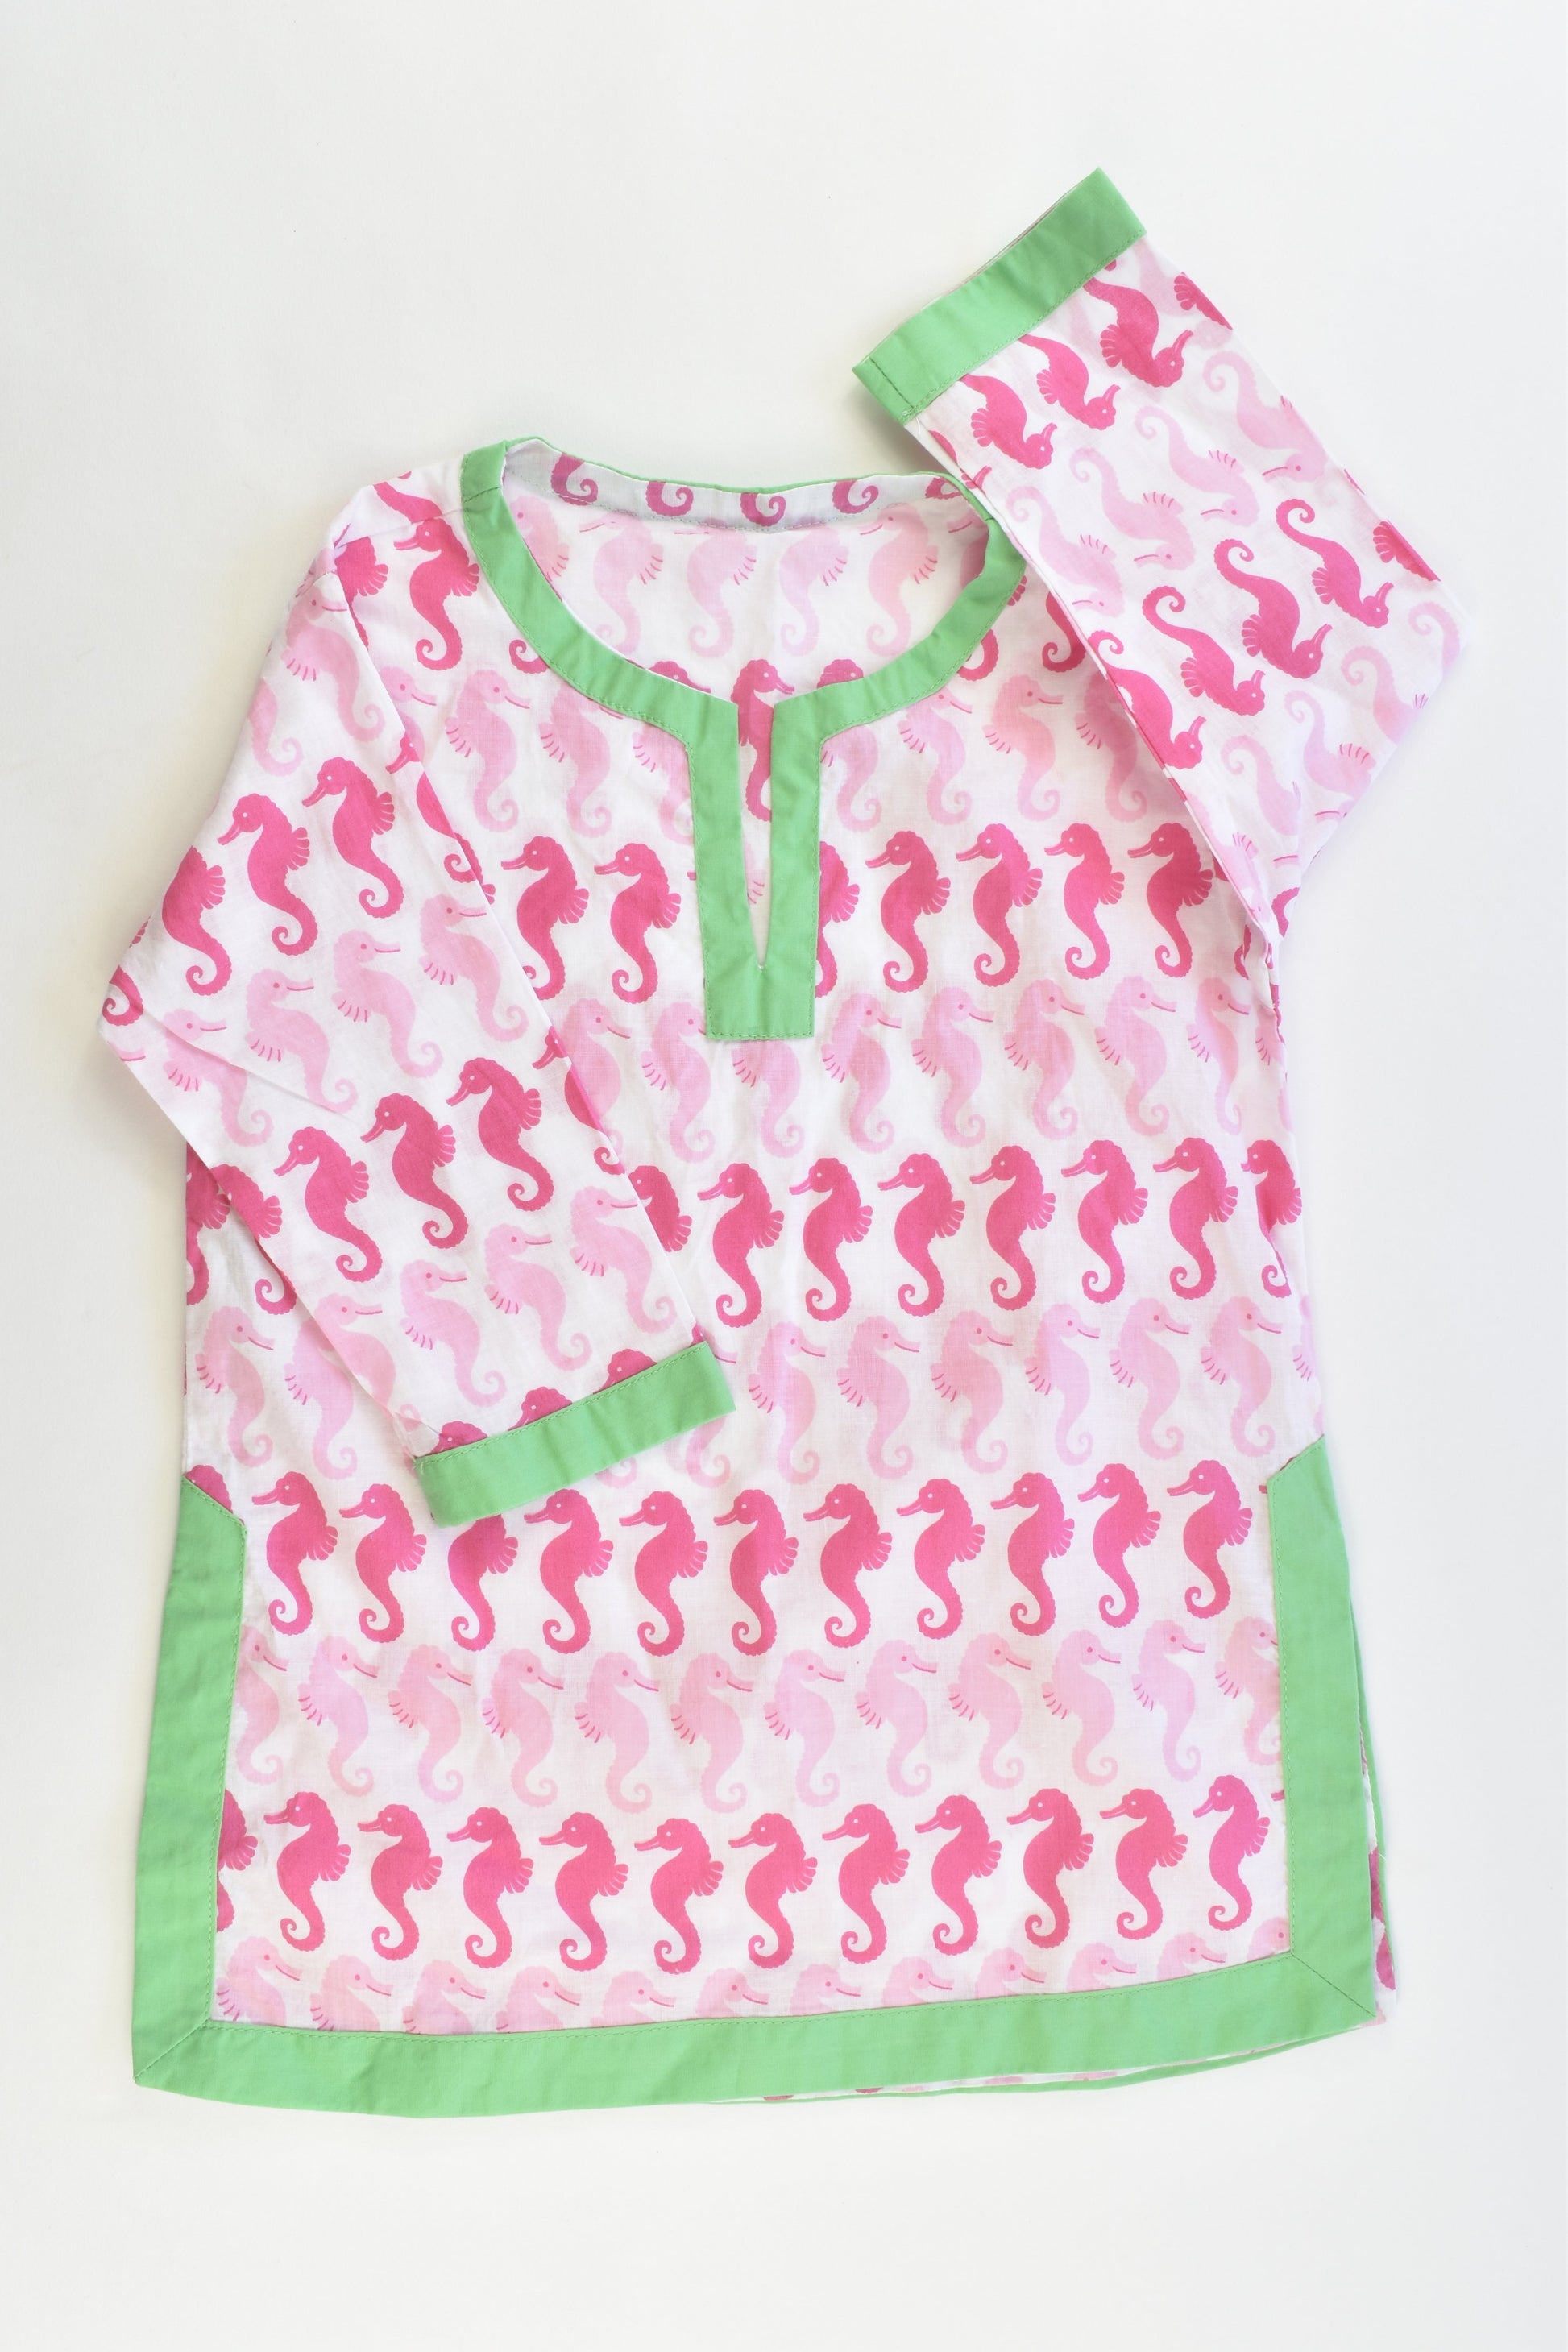 Pottery Barn Kids Size 12-18 months Seahorses Dress/Tunic